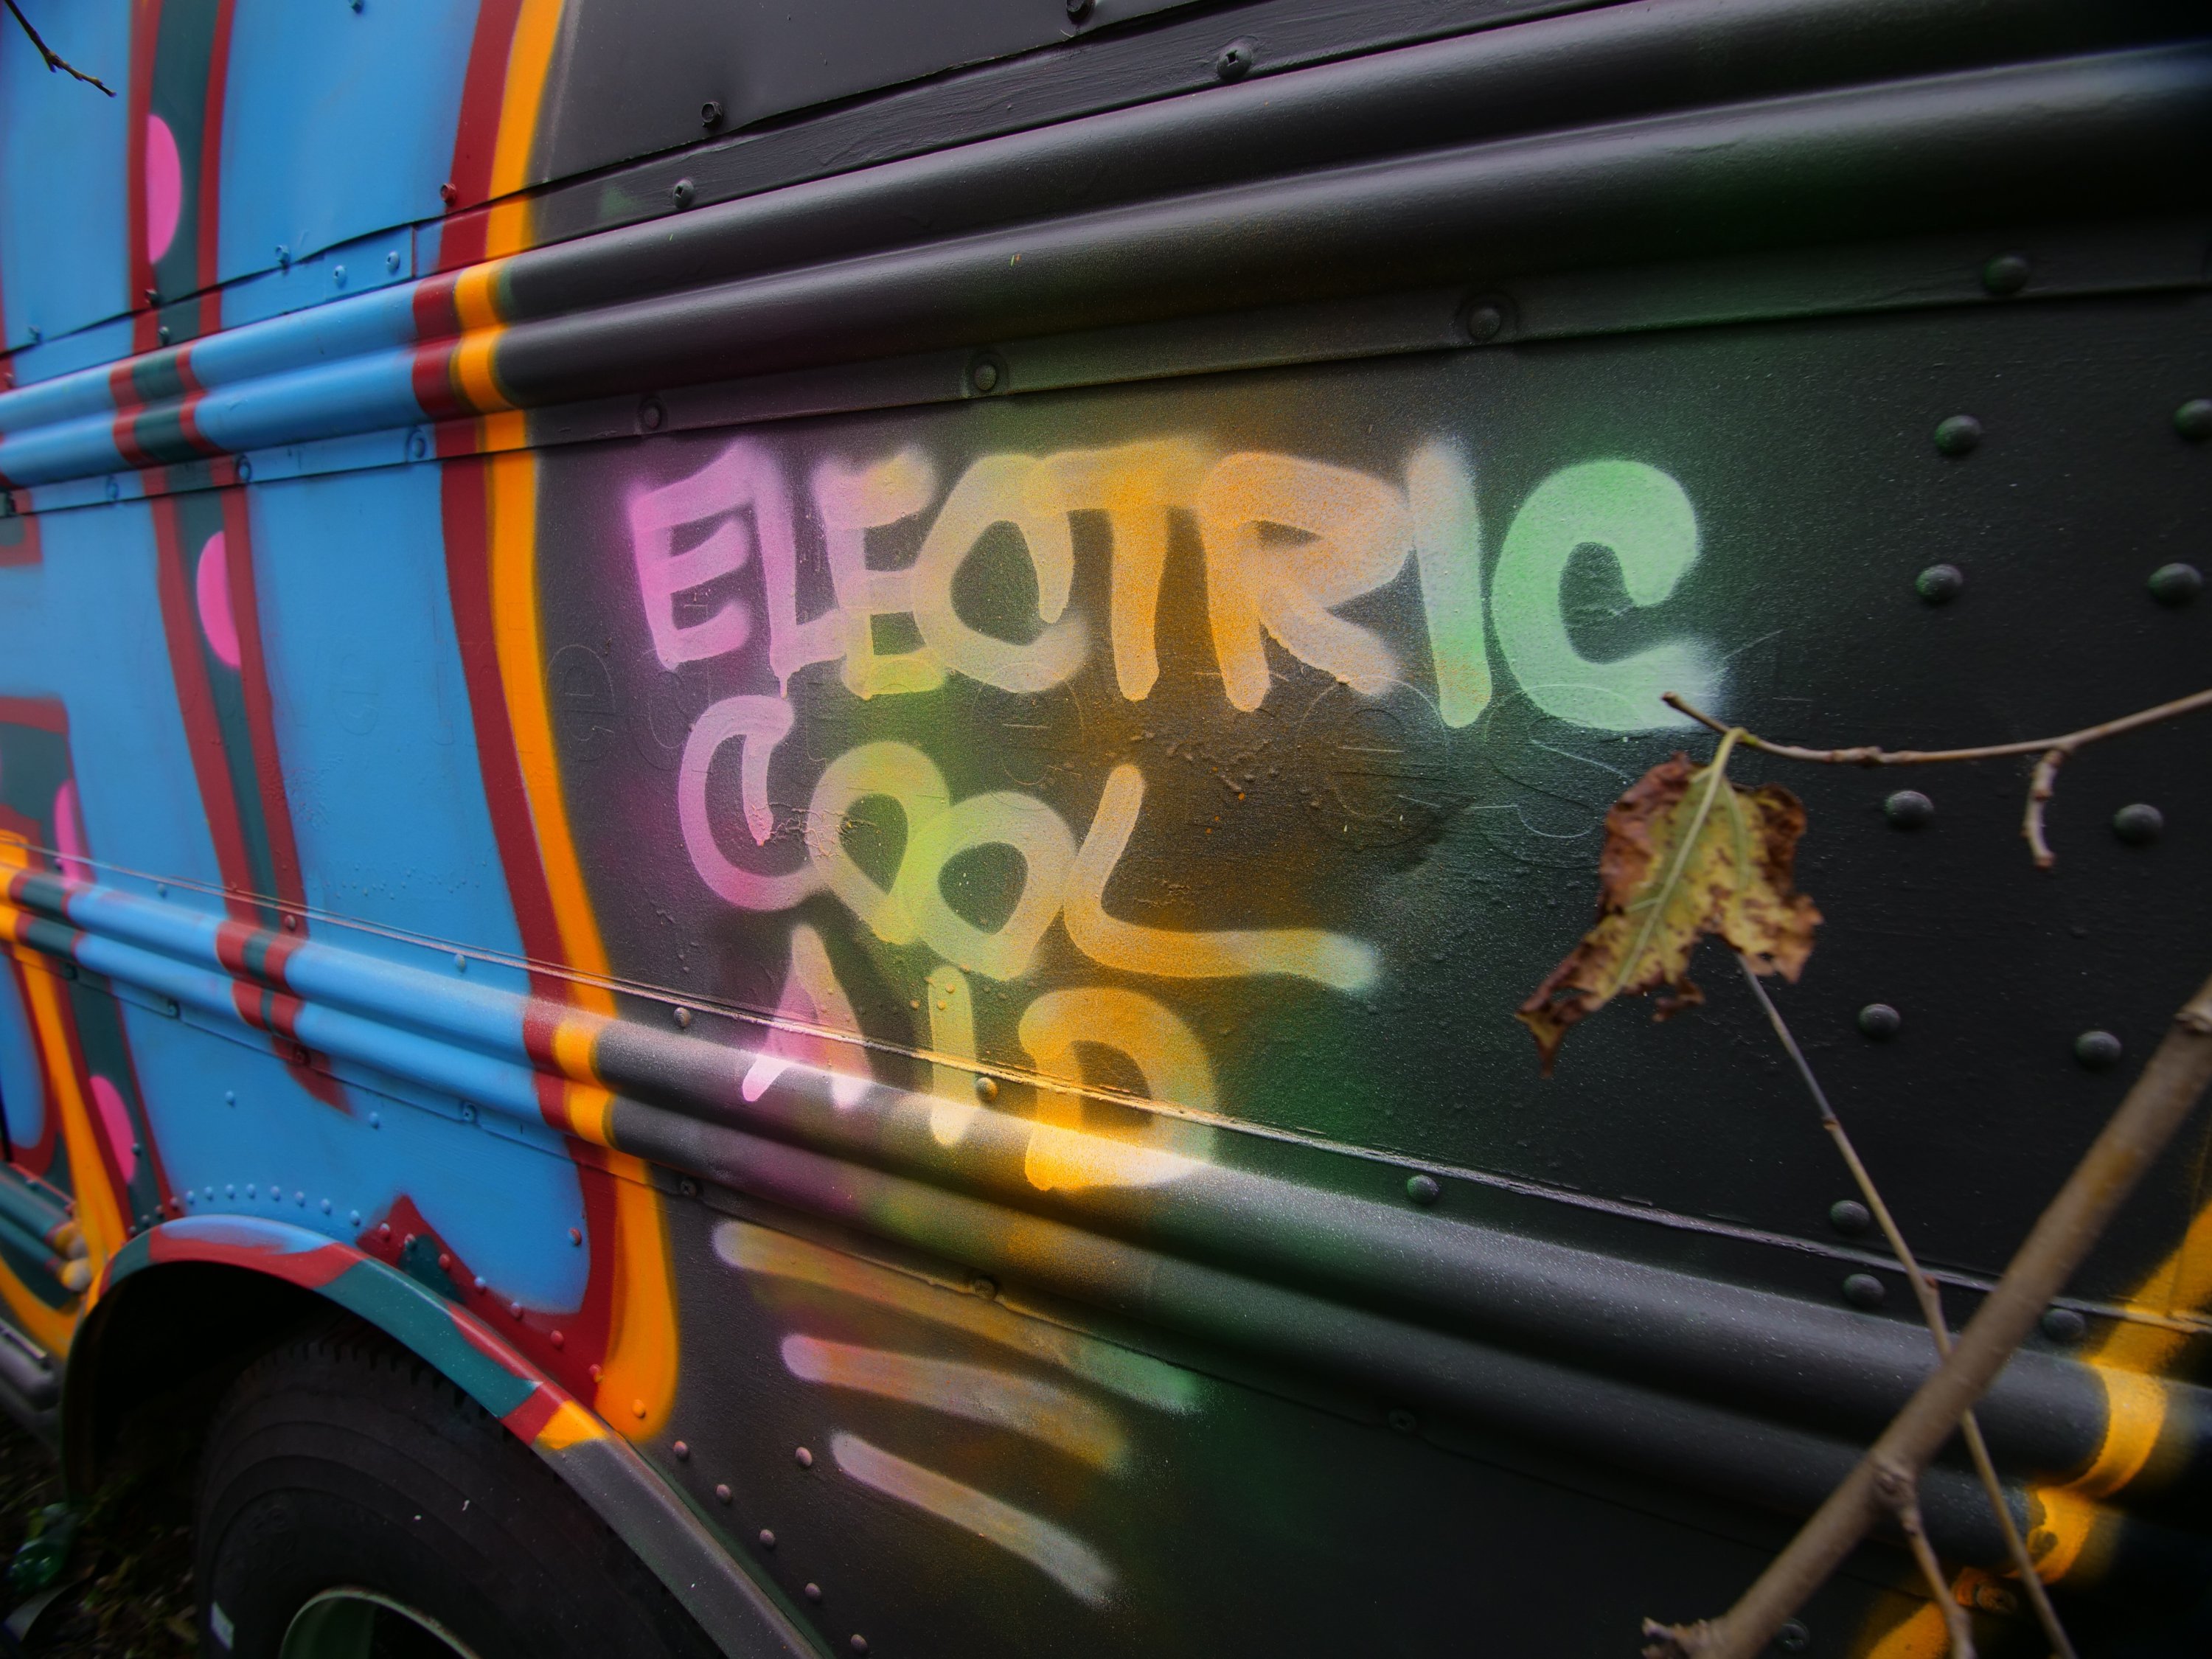 The name Electric Cool-Aid was inspired by the Merry Pranksters and their colorful bus. Photograph by Lisa Bolden. 